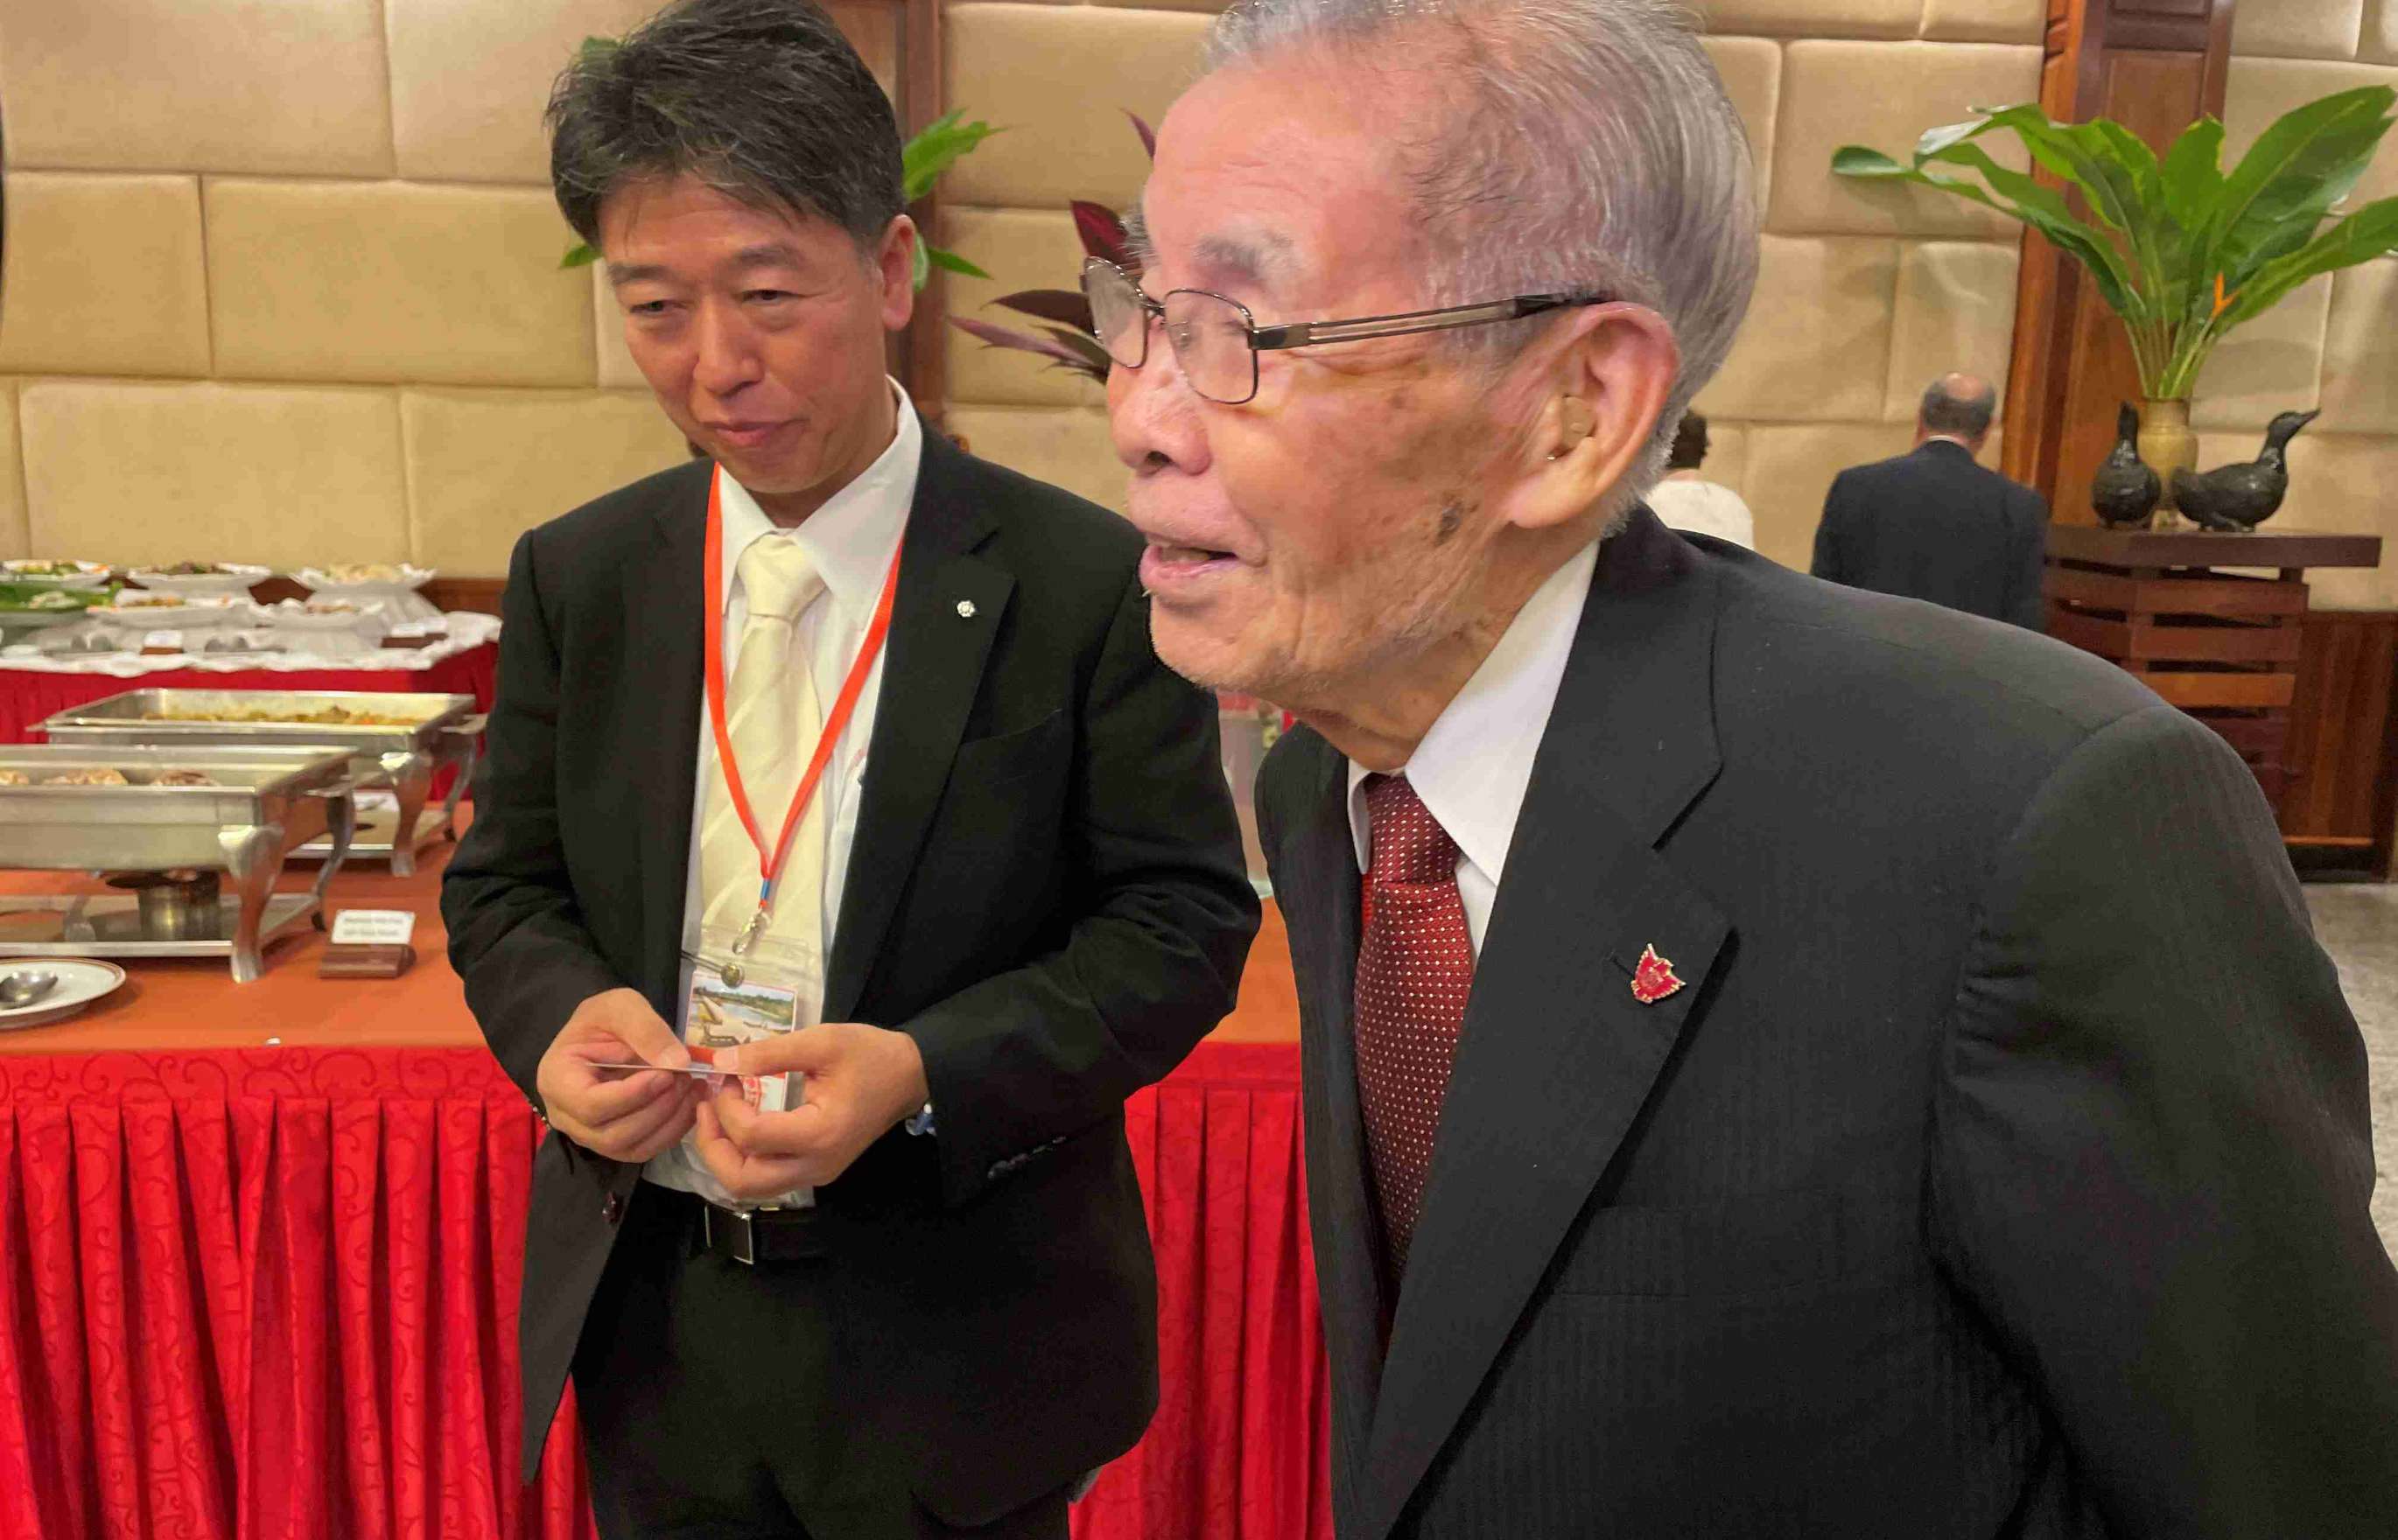 An elderly, distinguished looking, bespectacled Japanese man in a charcoal gray suit with his arms folded behind his back speaks to someone out of frame in a banquet hall. A younger Japanese man in a suit in the background listens to the conversation.